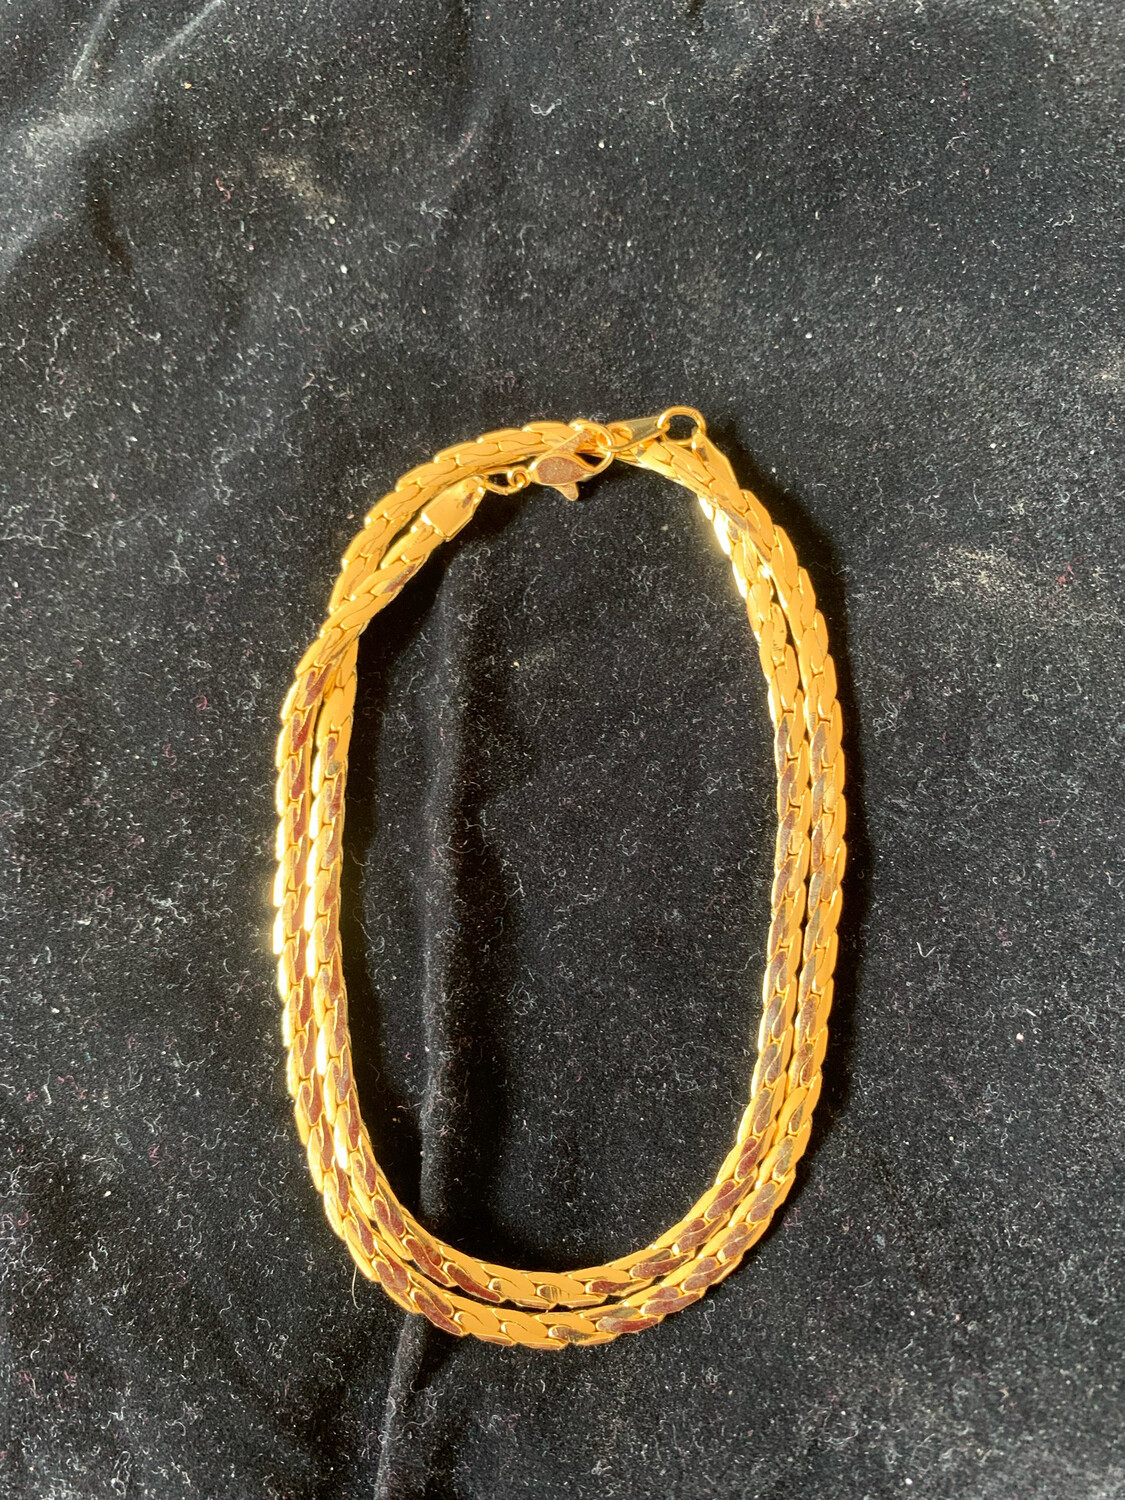 18" 24K Gold Plated 5mm Wheat-like Chain with Lobster Claw Clasp